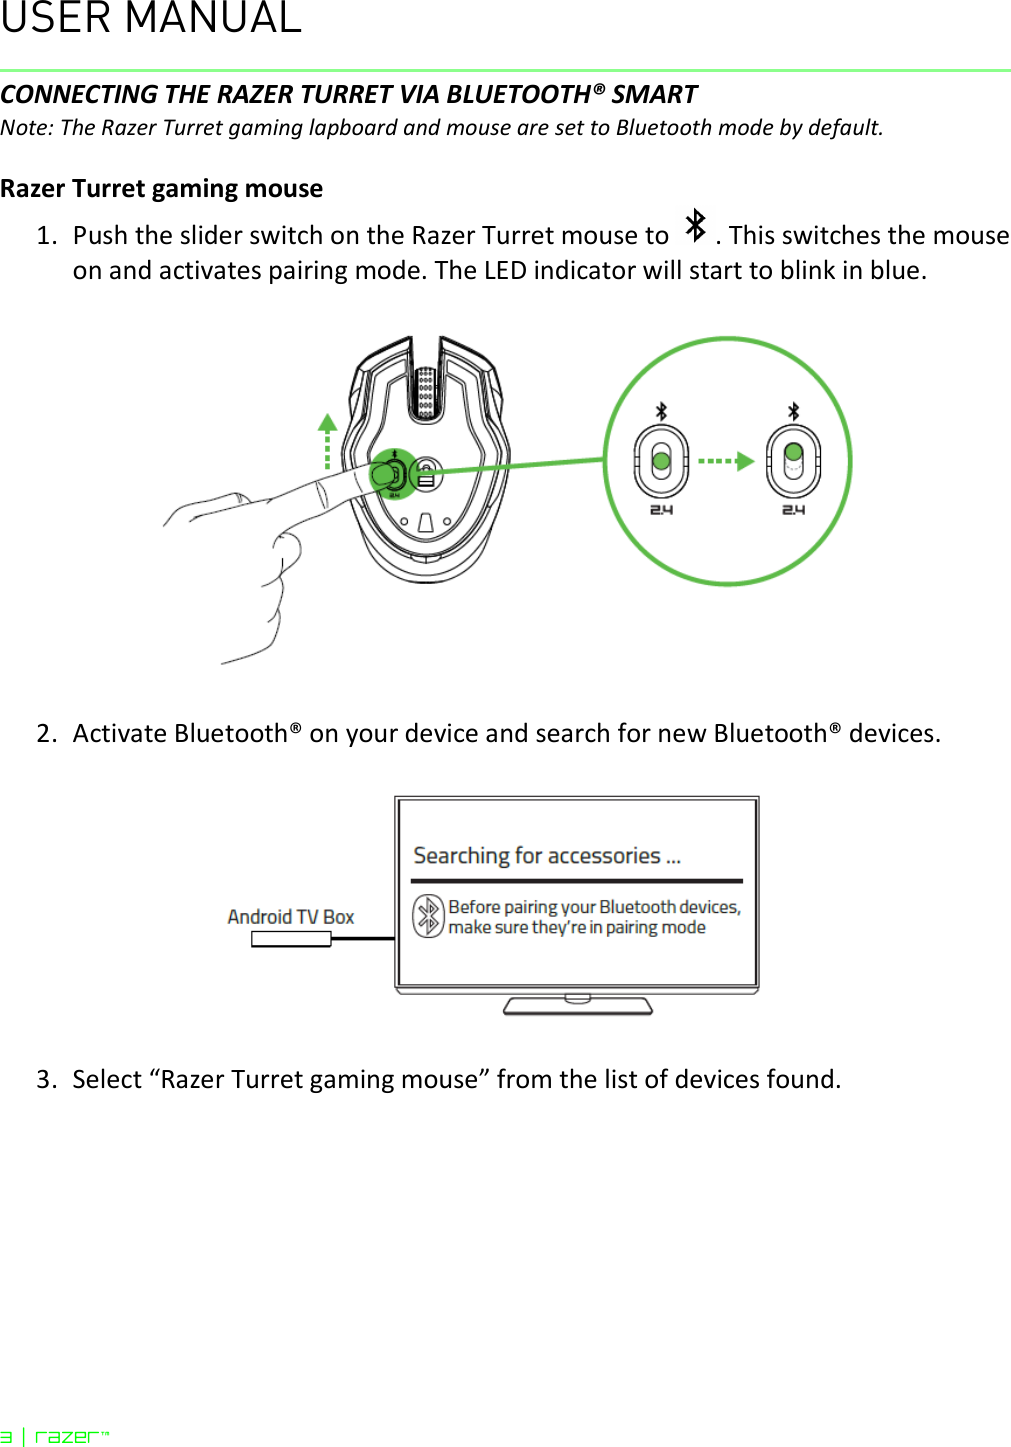 USER MANUAL 3 | razer™  CONNECTING THE RAZER TURRET VIA BLUETOOTH® SMART Note: The Razer Turret gaming lapboard and mouse are set to Bluetooth mode by default.  Razer Turret gaming mouse 1. Push the slider switch on the Razer Turret mouse to  . This switches the mouse on and activates pairing mode. The LED indicator will start to blink in blue.    2. Activate Bluetooth® on your device and search for new Bluetooth® devices.    3. Select “Razer Turret gaming mouse” from the list of devices found. 